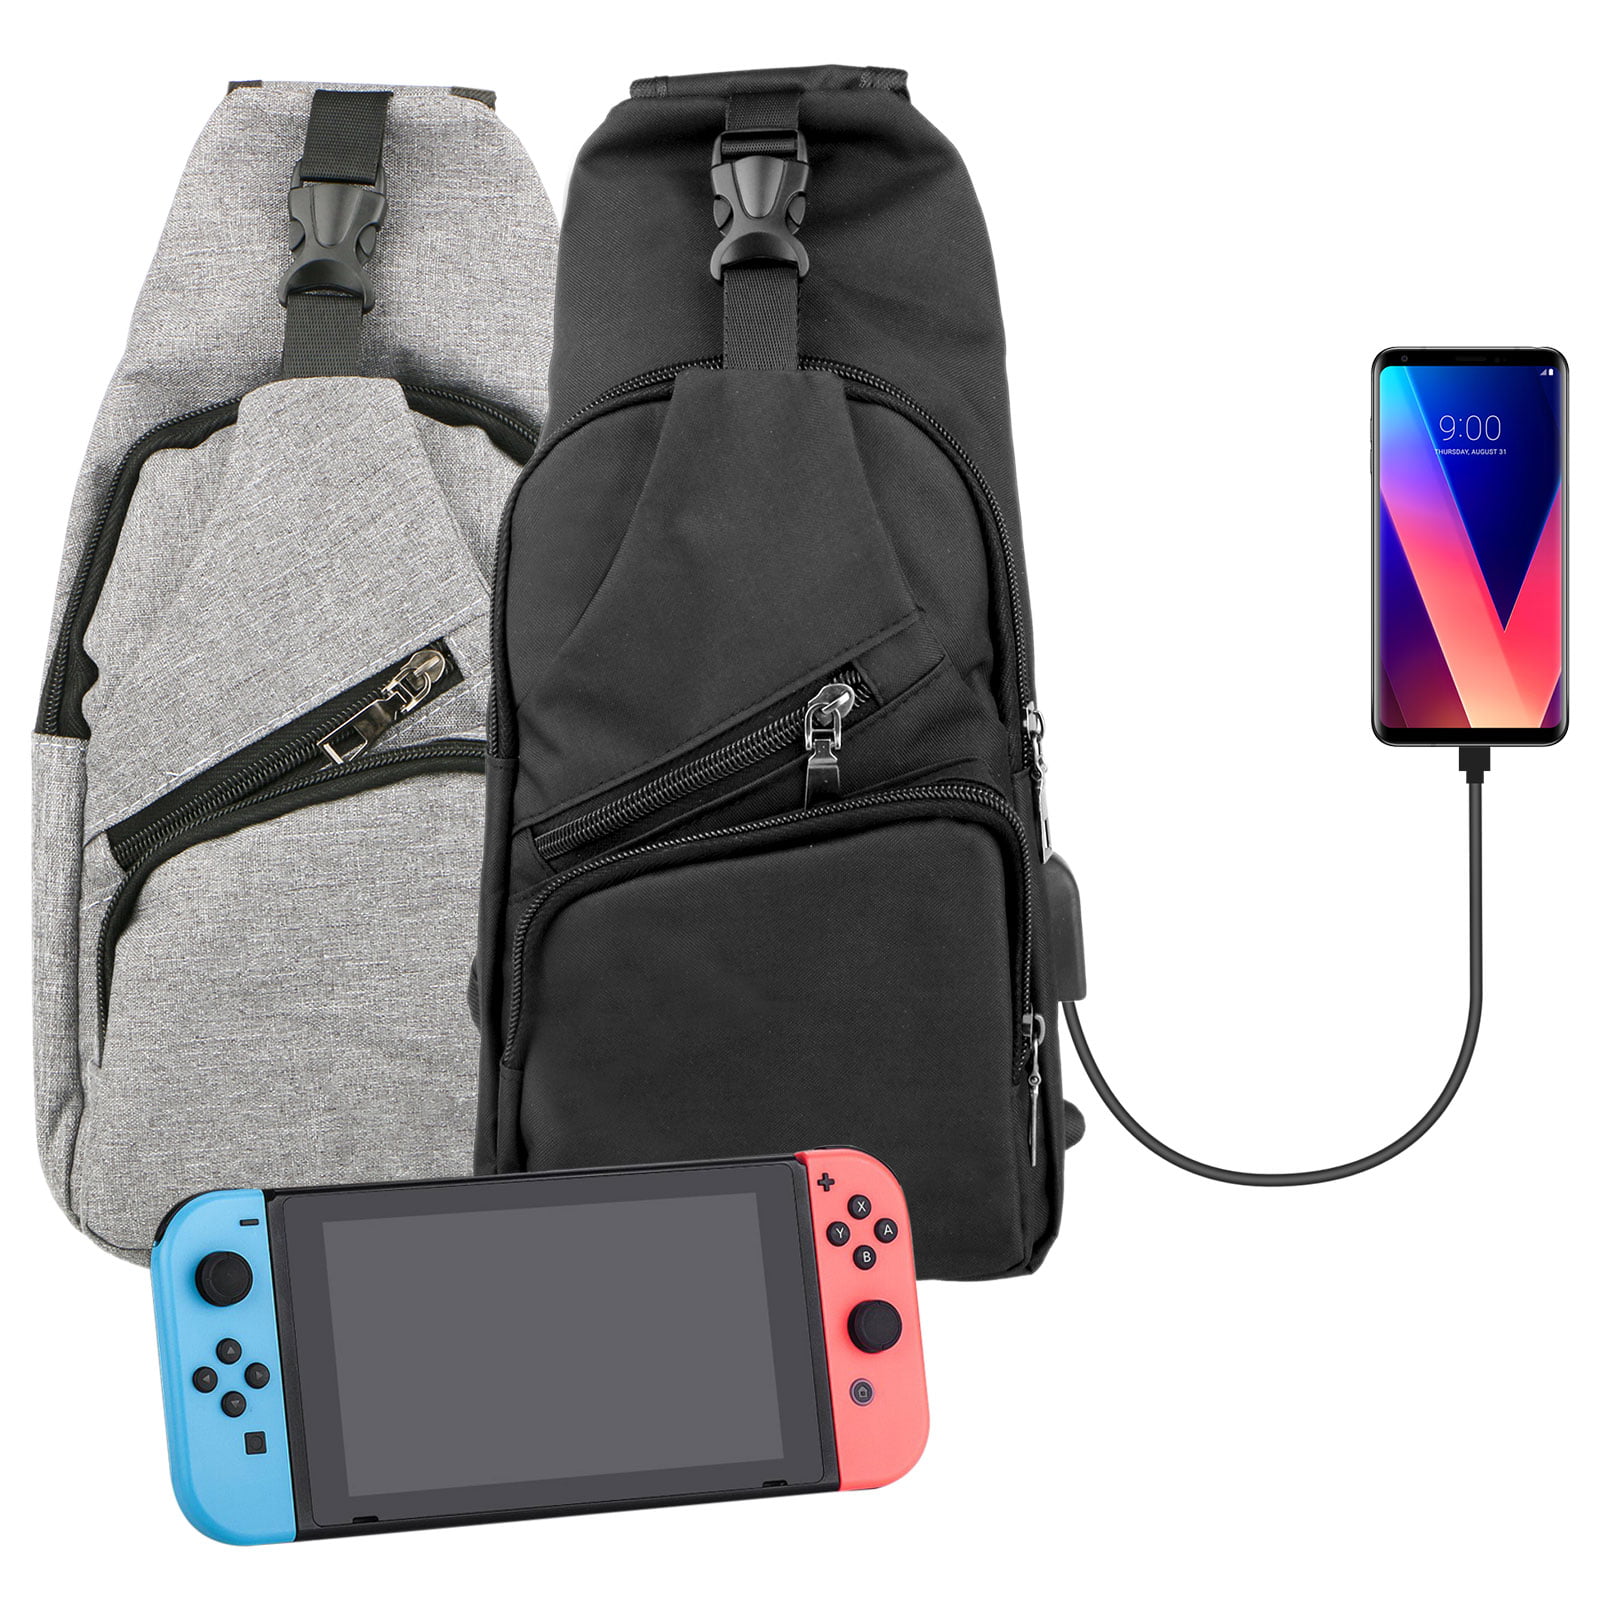 Switch Backpack Travel Bag for Nintendo Switch with USB Charger Port ...